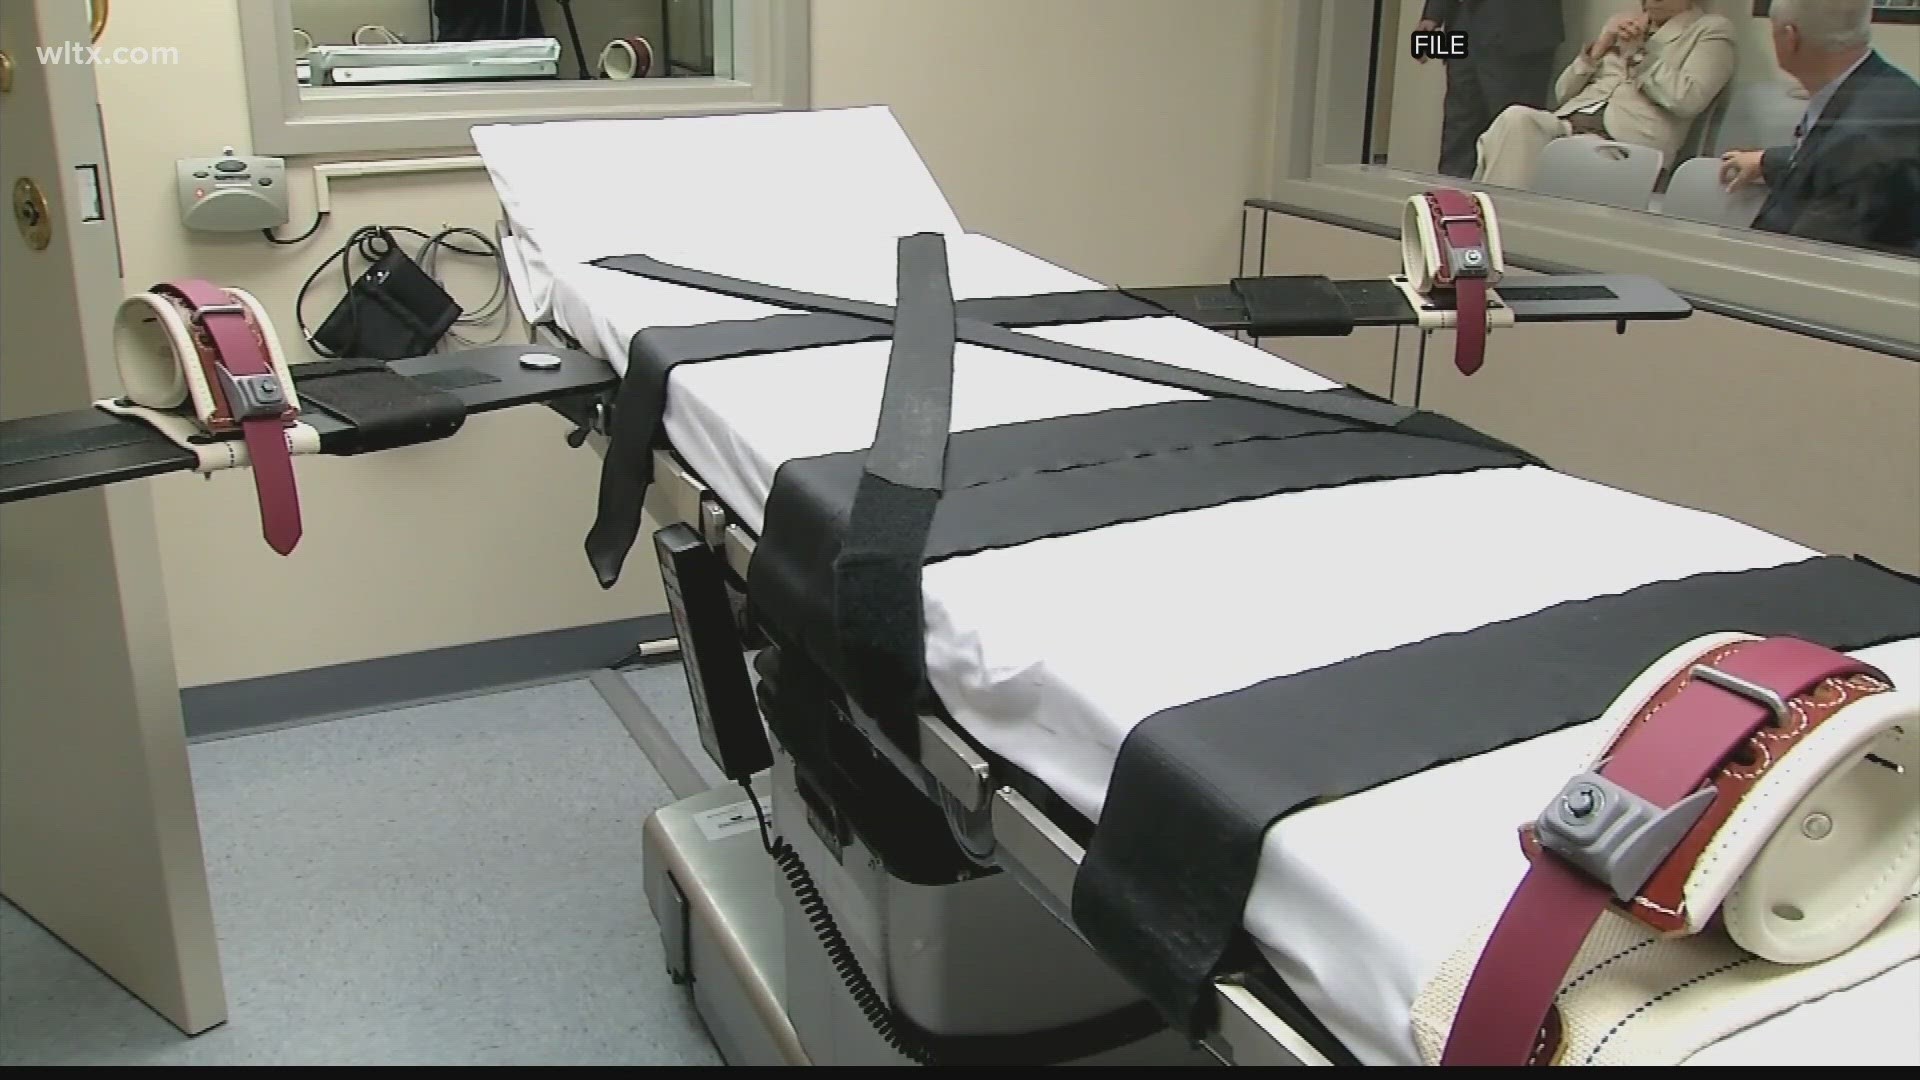 SC Department of Corrections along with Gov. McMaster have informed the state supreme court that they are prepared to carry out lethal injections.